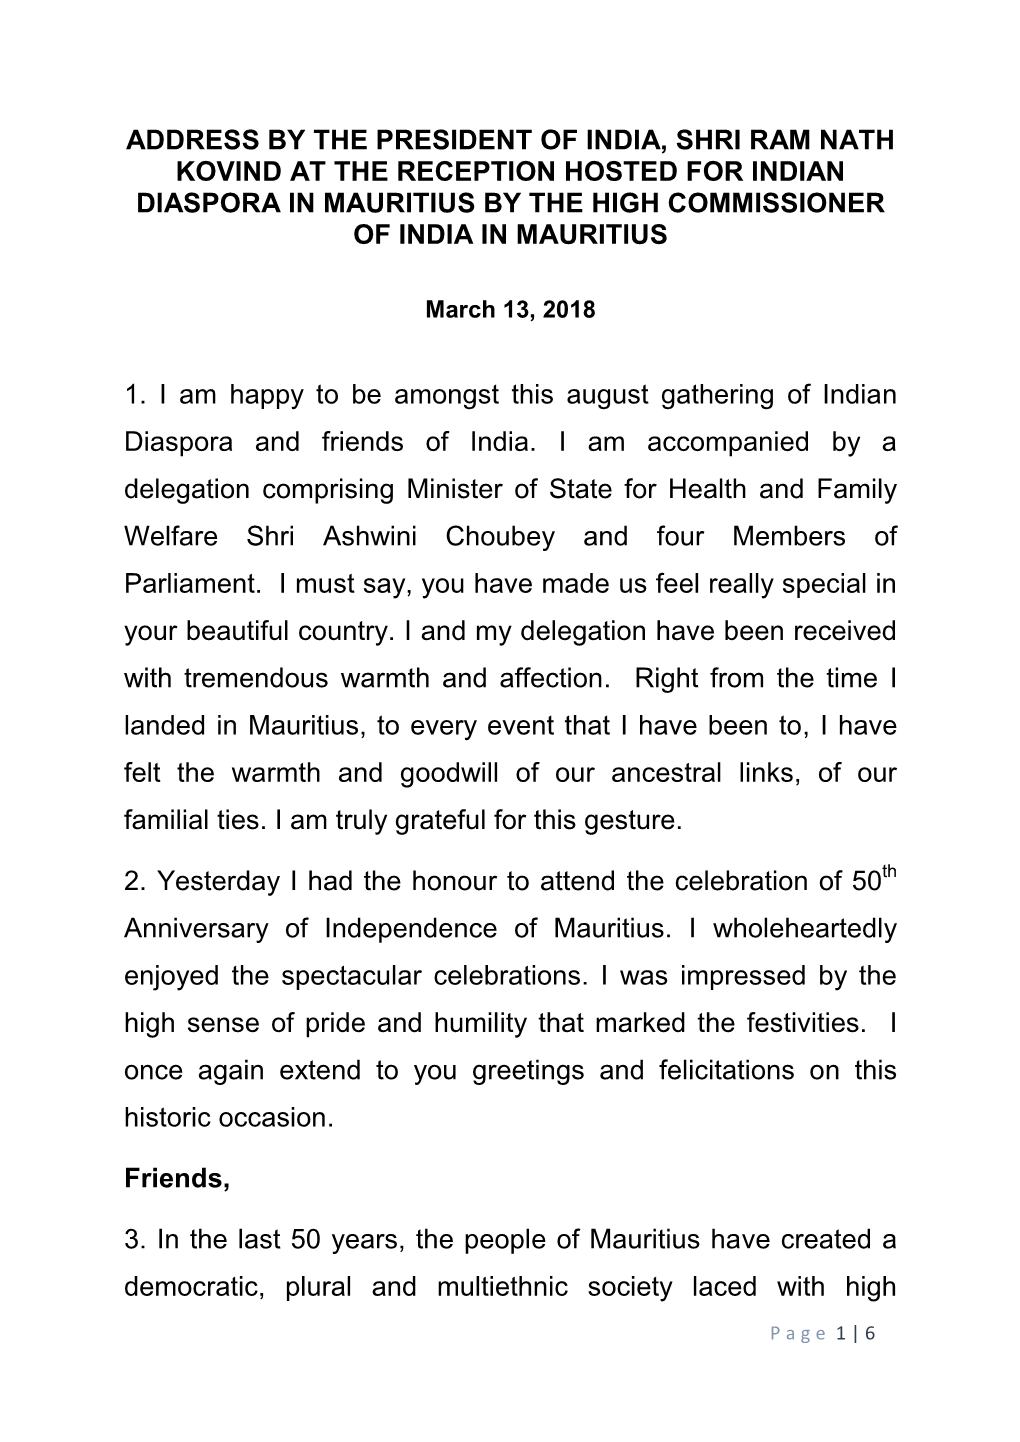 Address by the President of India, Shri Ram Nath Kovind at the Reception Hosted for Indian Diaspora in Mauritius by the High Commissioner of India in Mauritius